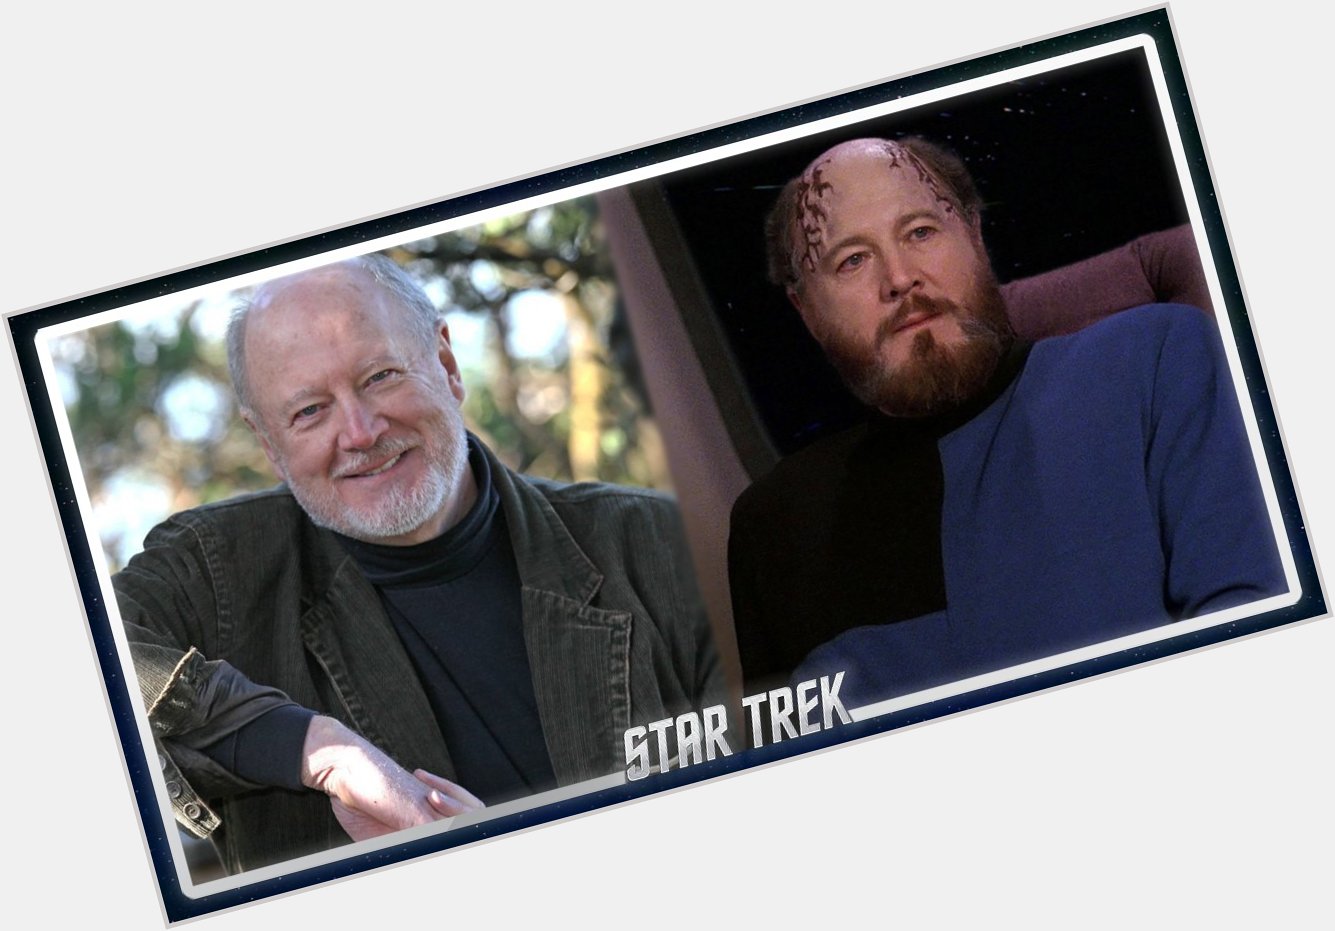 Happy Birthday to David Ogden Stiers who portrayed the character of Timicin in The Next Generation! 